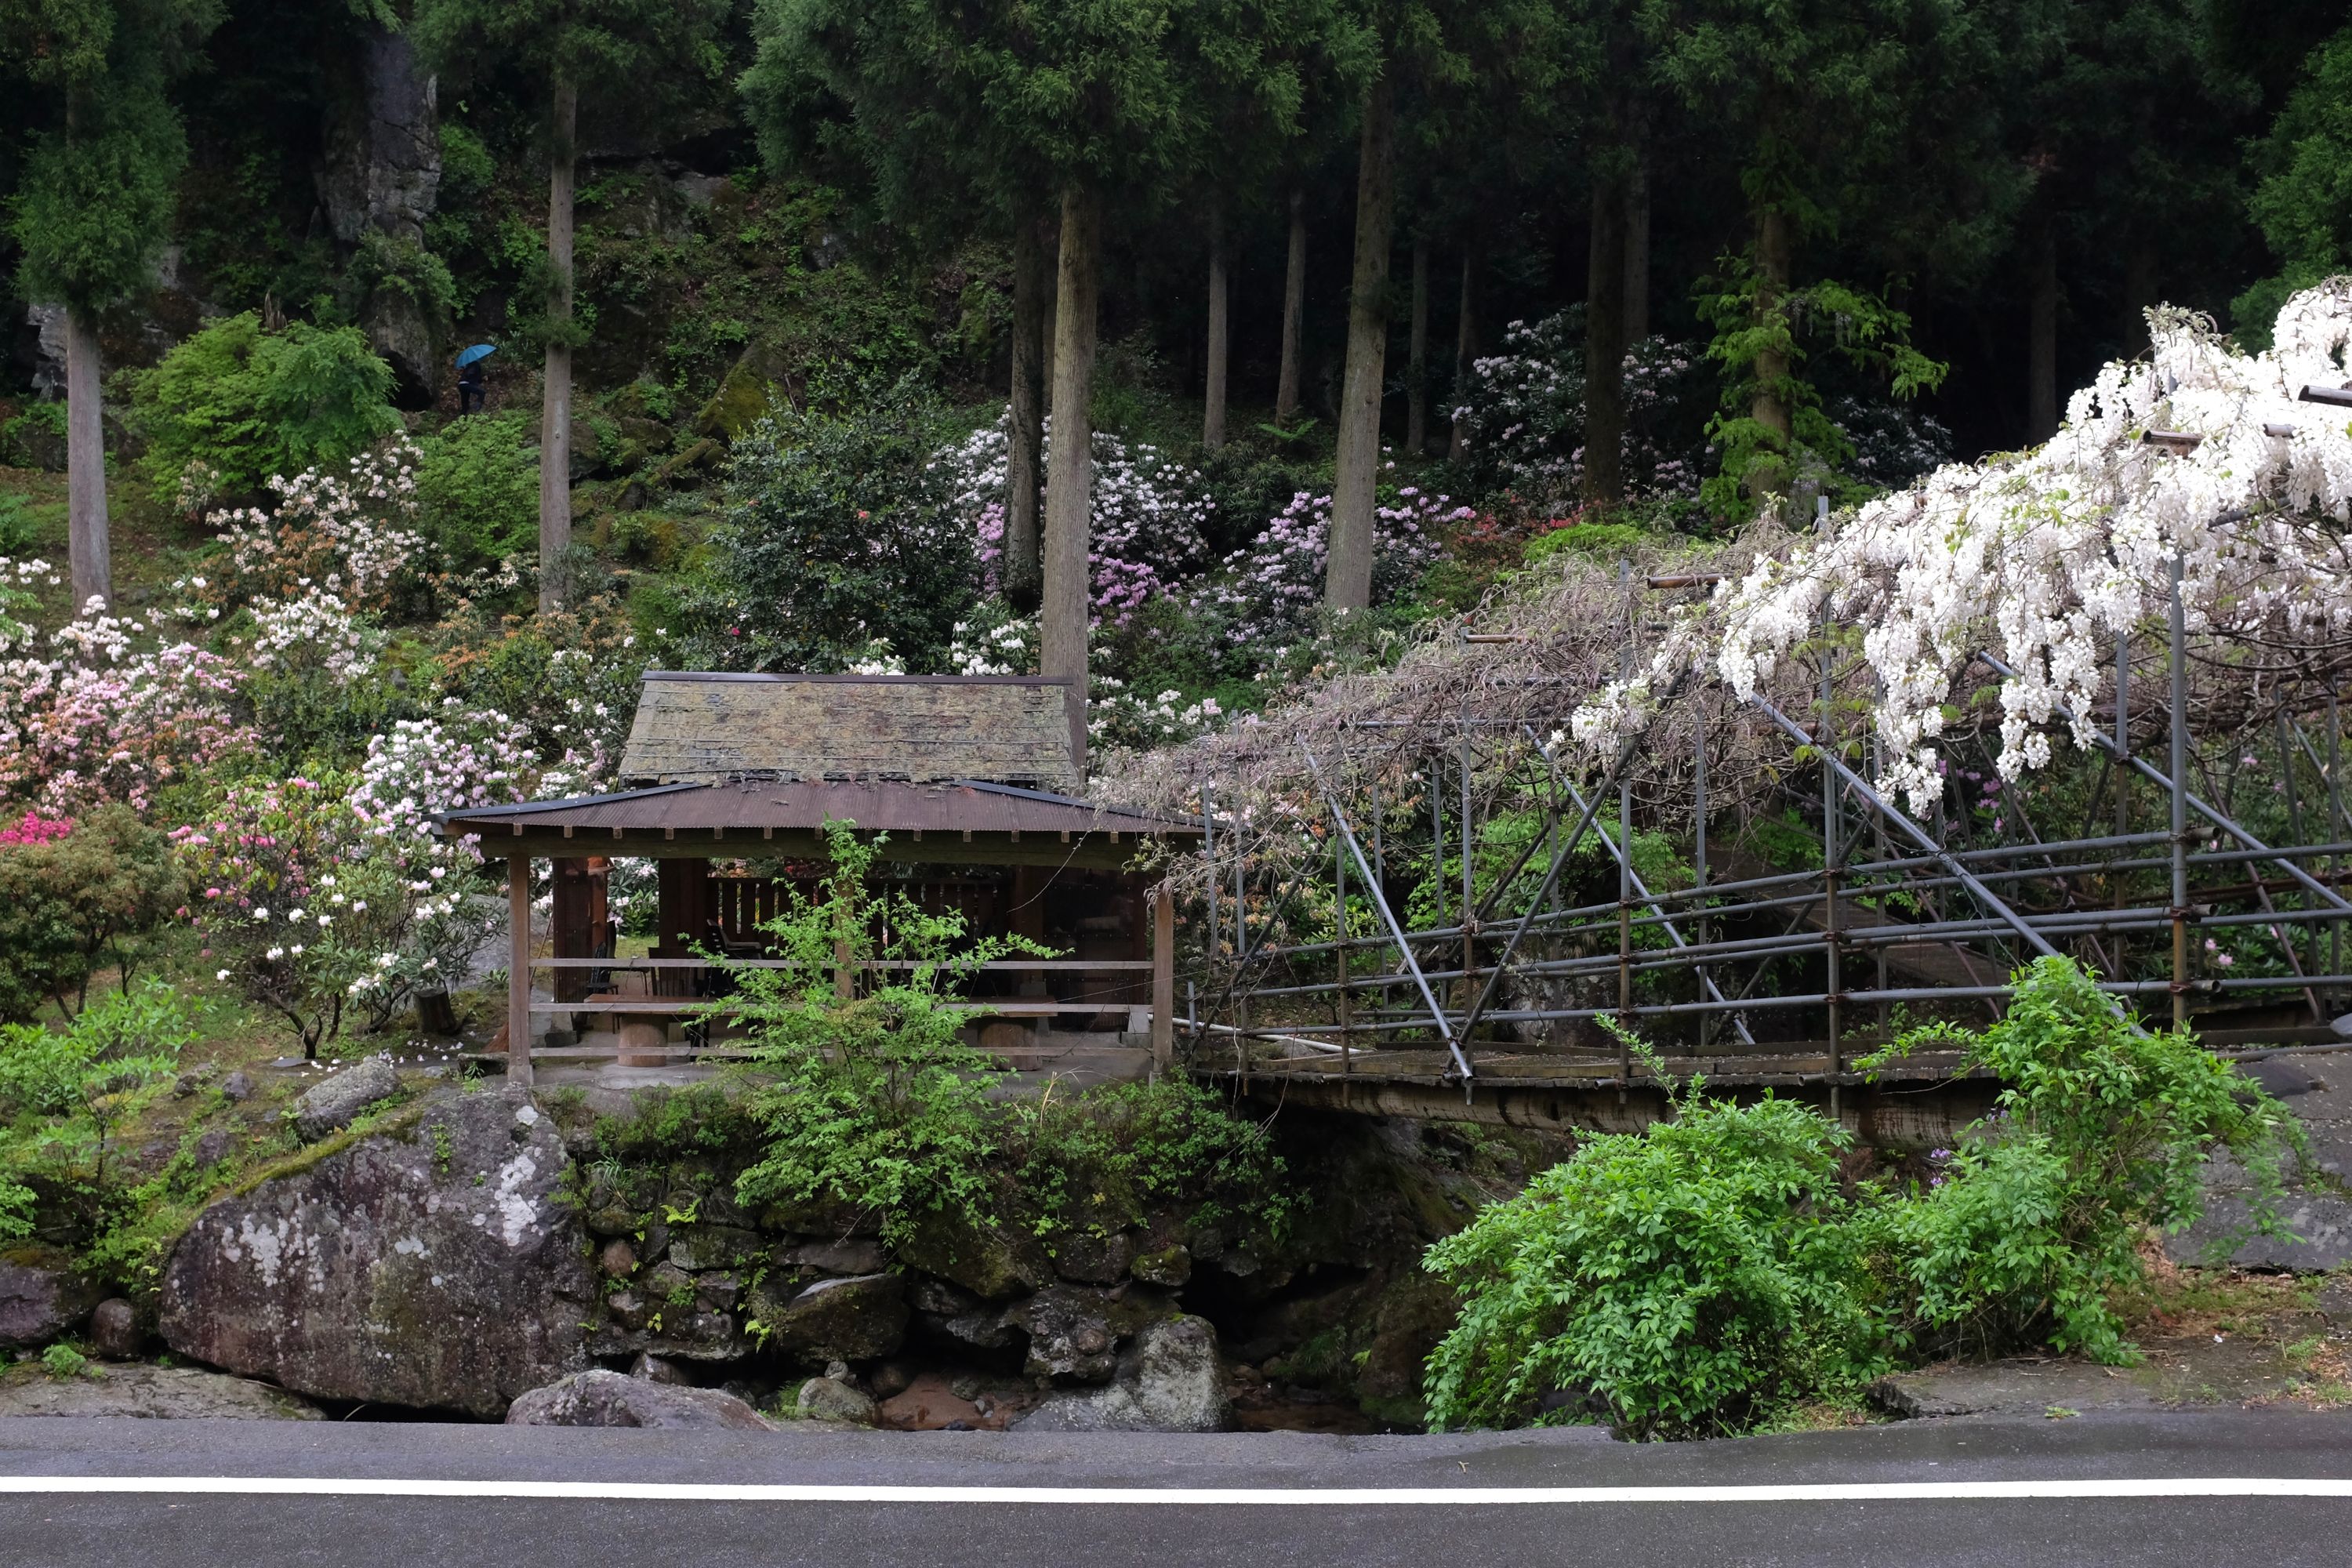 A bridge covered with white wisteria leads to a wooden rest house at the edge of a cedar forest.